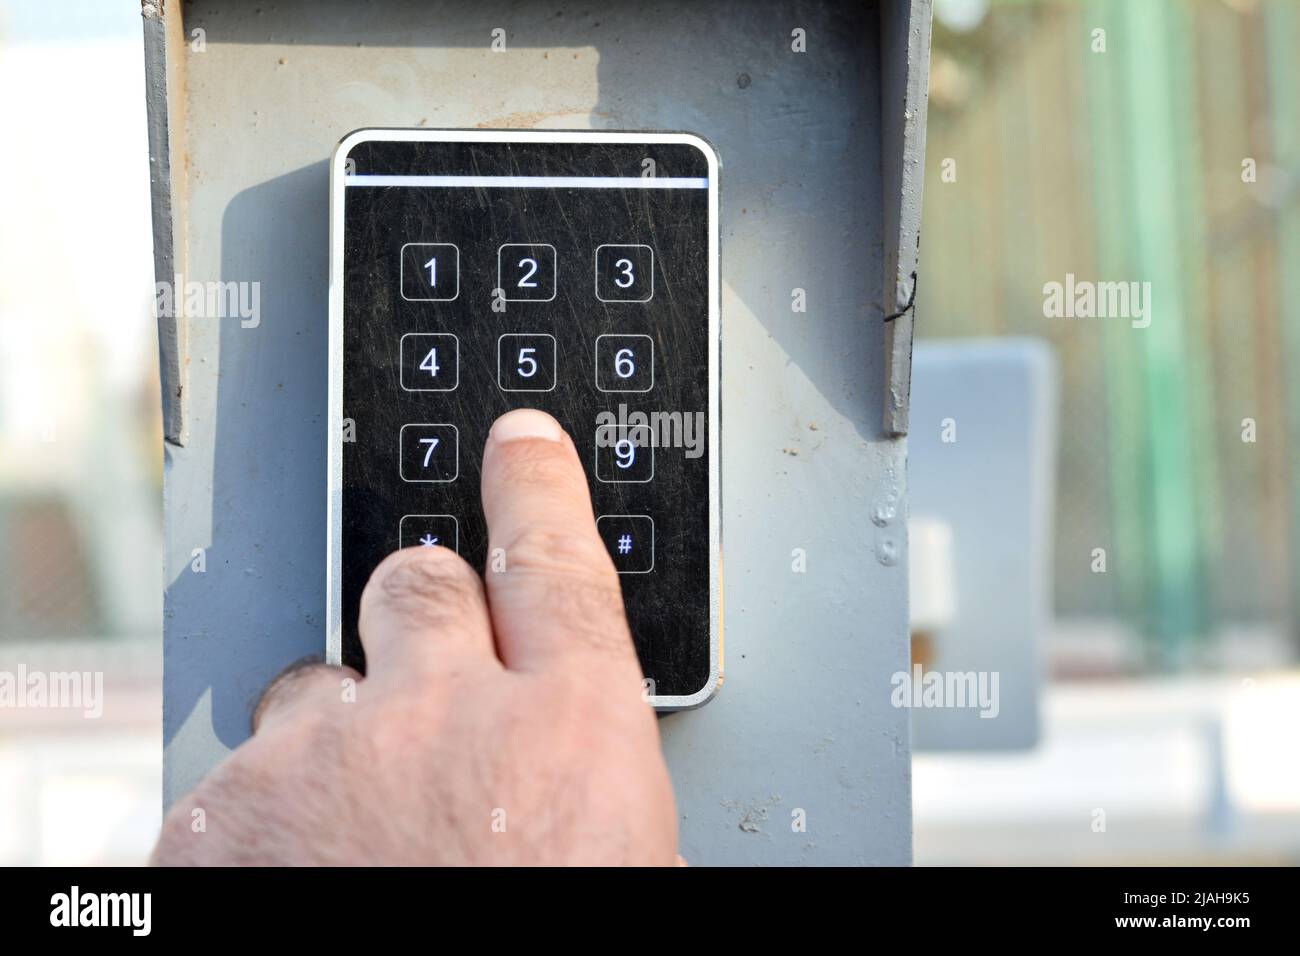 a persons hand pressing a password on a numerical keypad to lock or unlock an alarm system, opening garage gate for car entry, alarm system technical Stock Photo